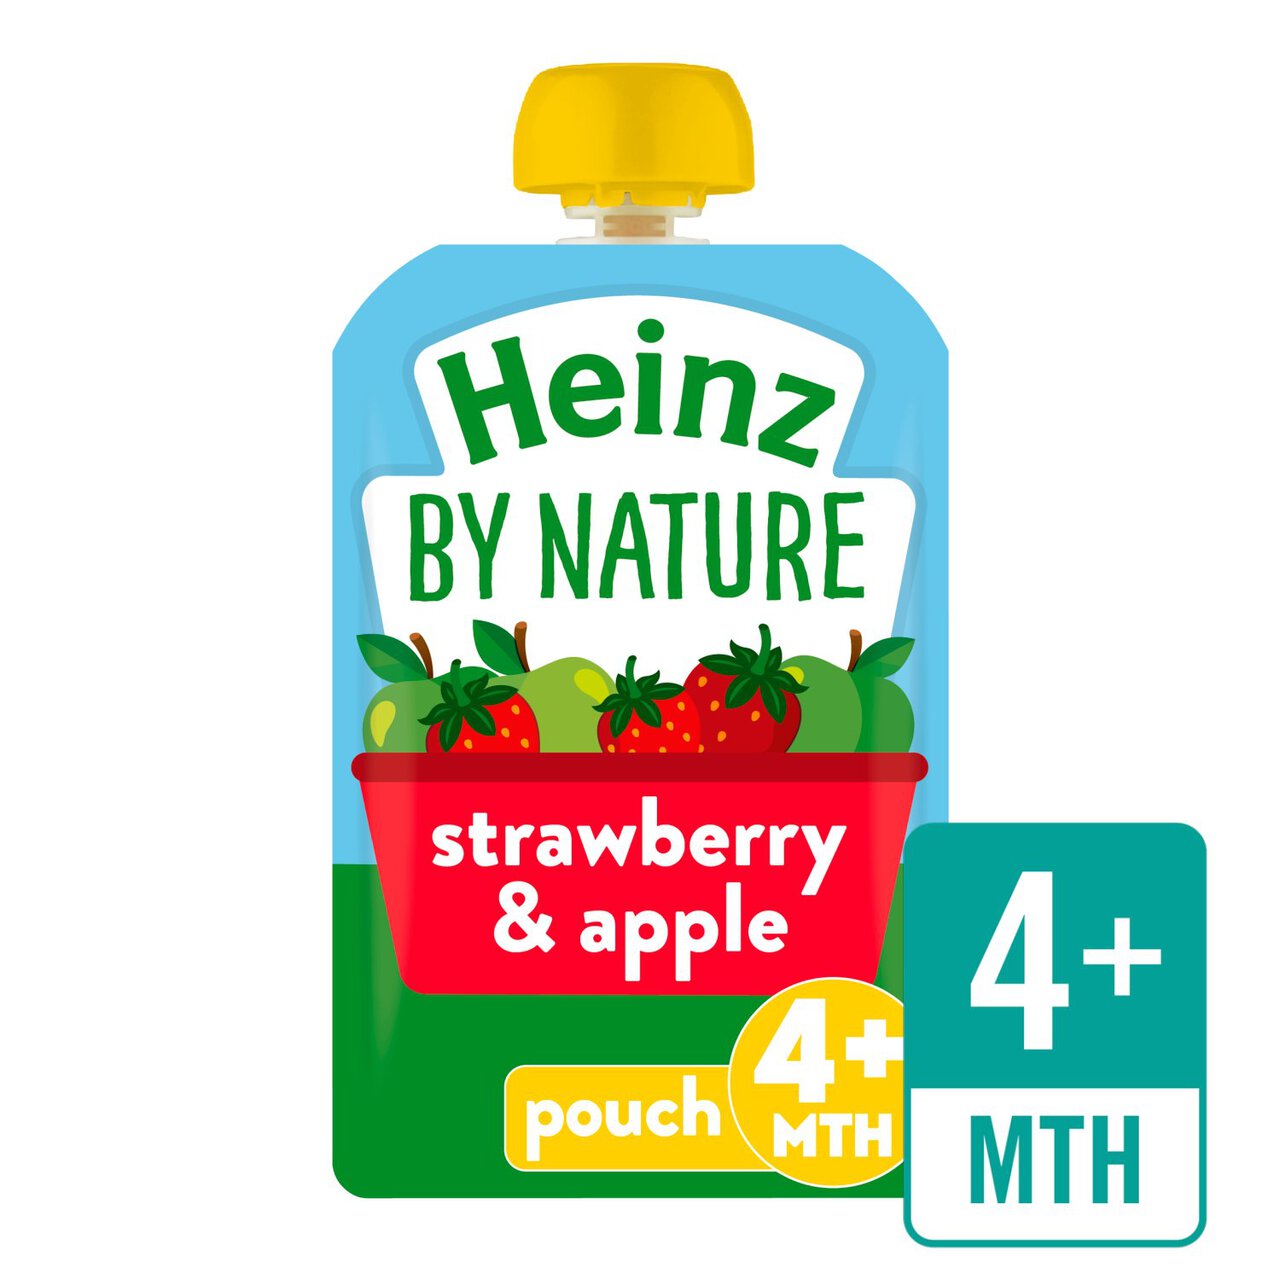 Heinz by Nature Strawberry & Apple Pouch, 4 mths+ 100g